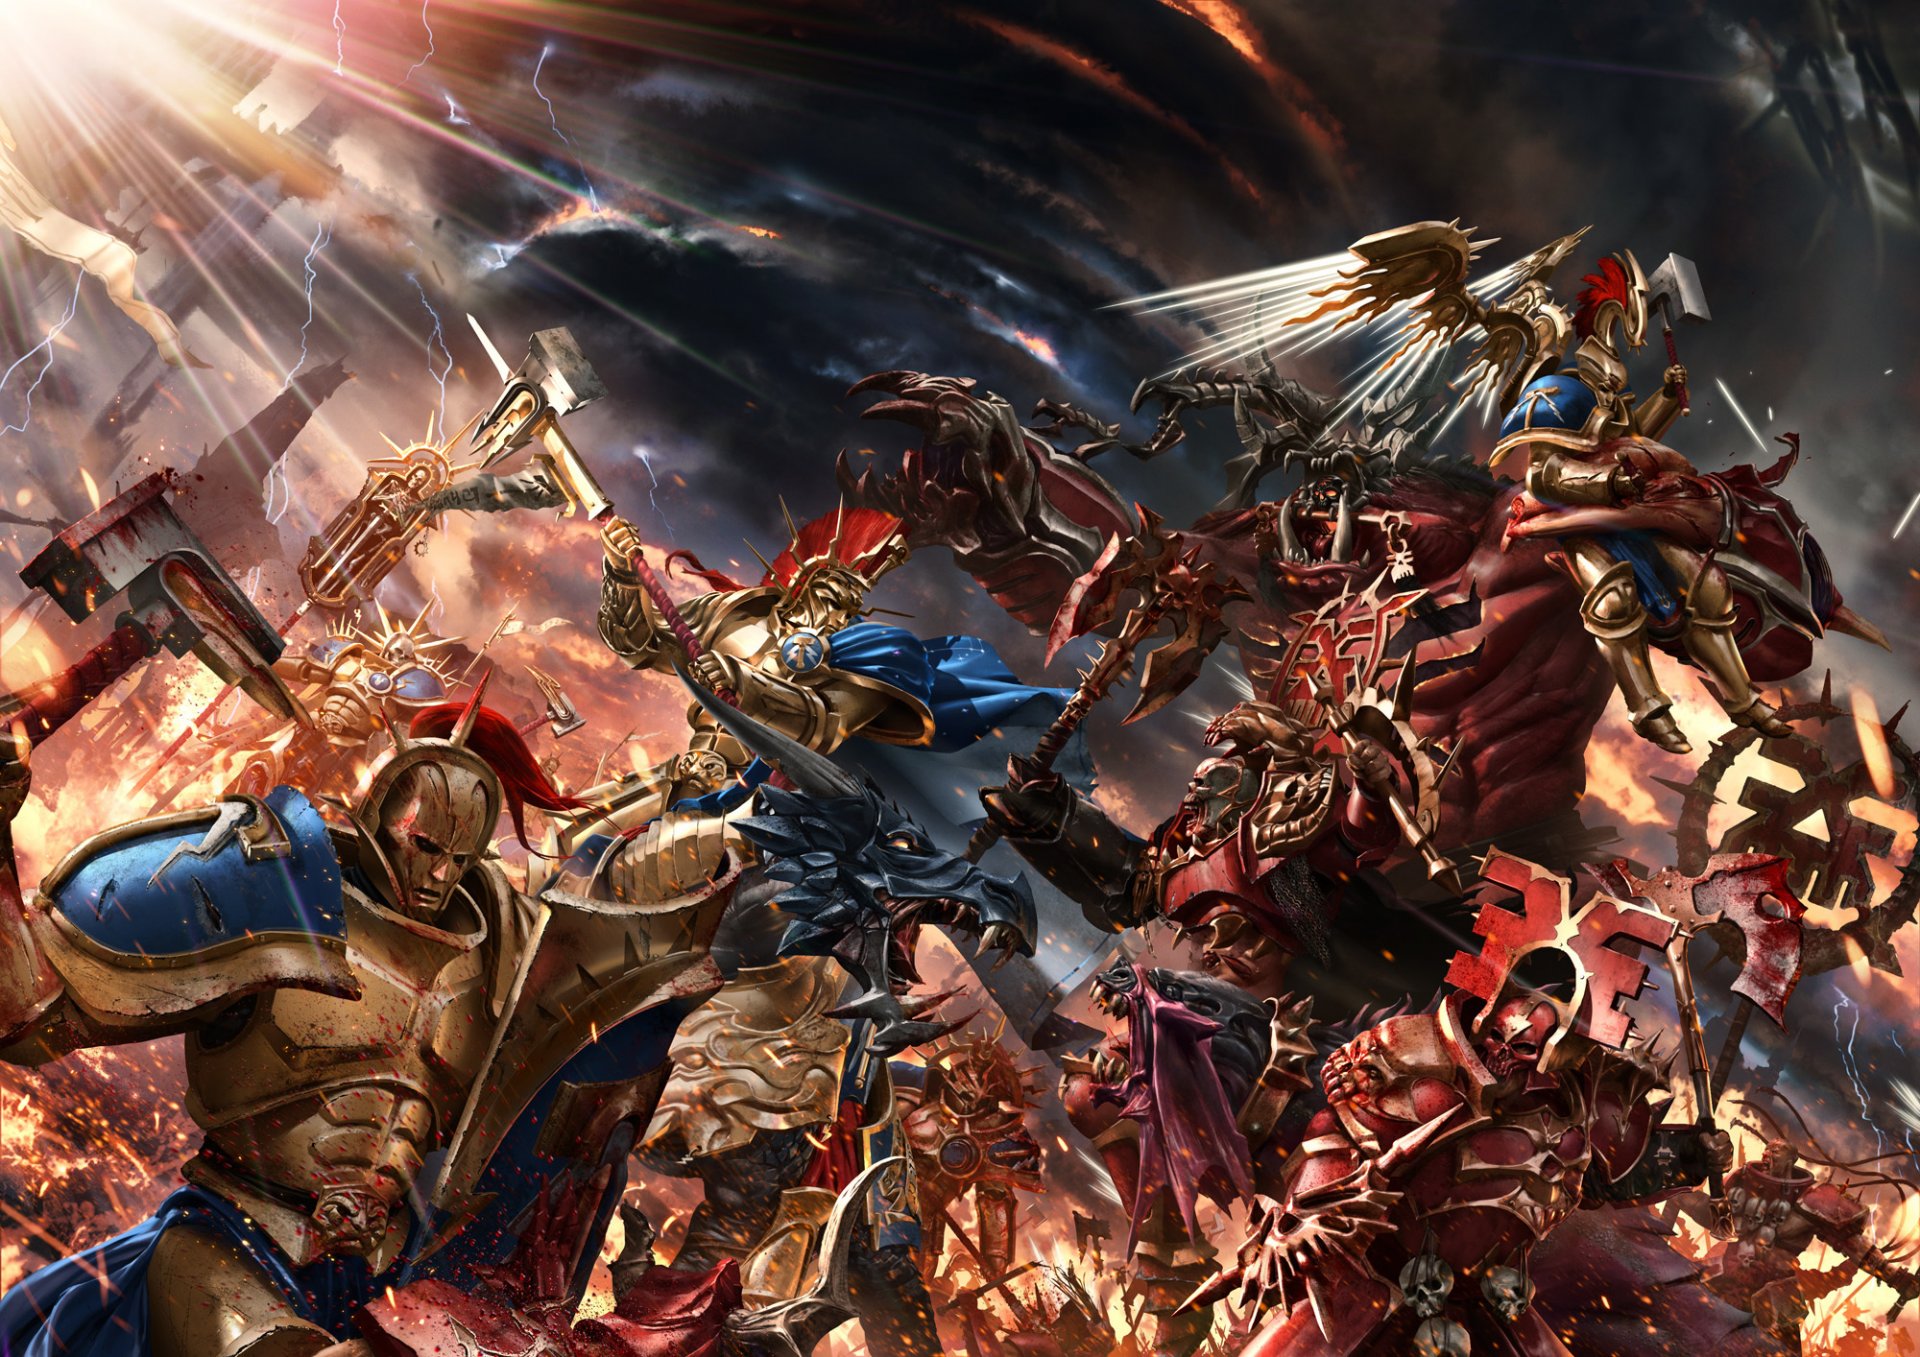 Age of Sigmar, the game of High Fantasy Battles